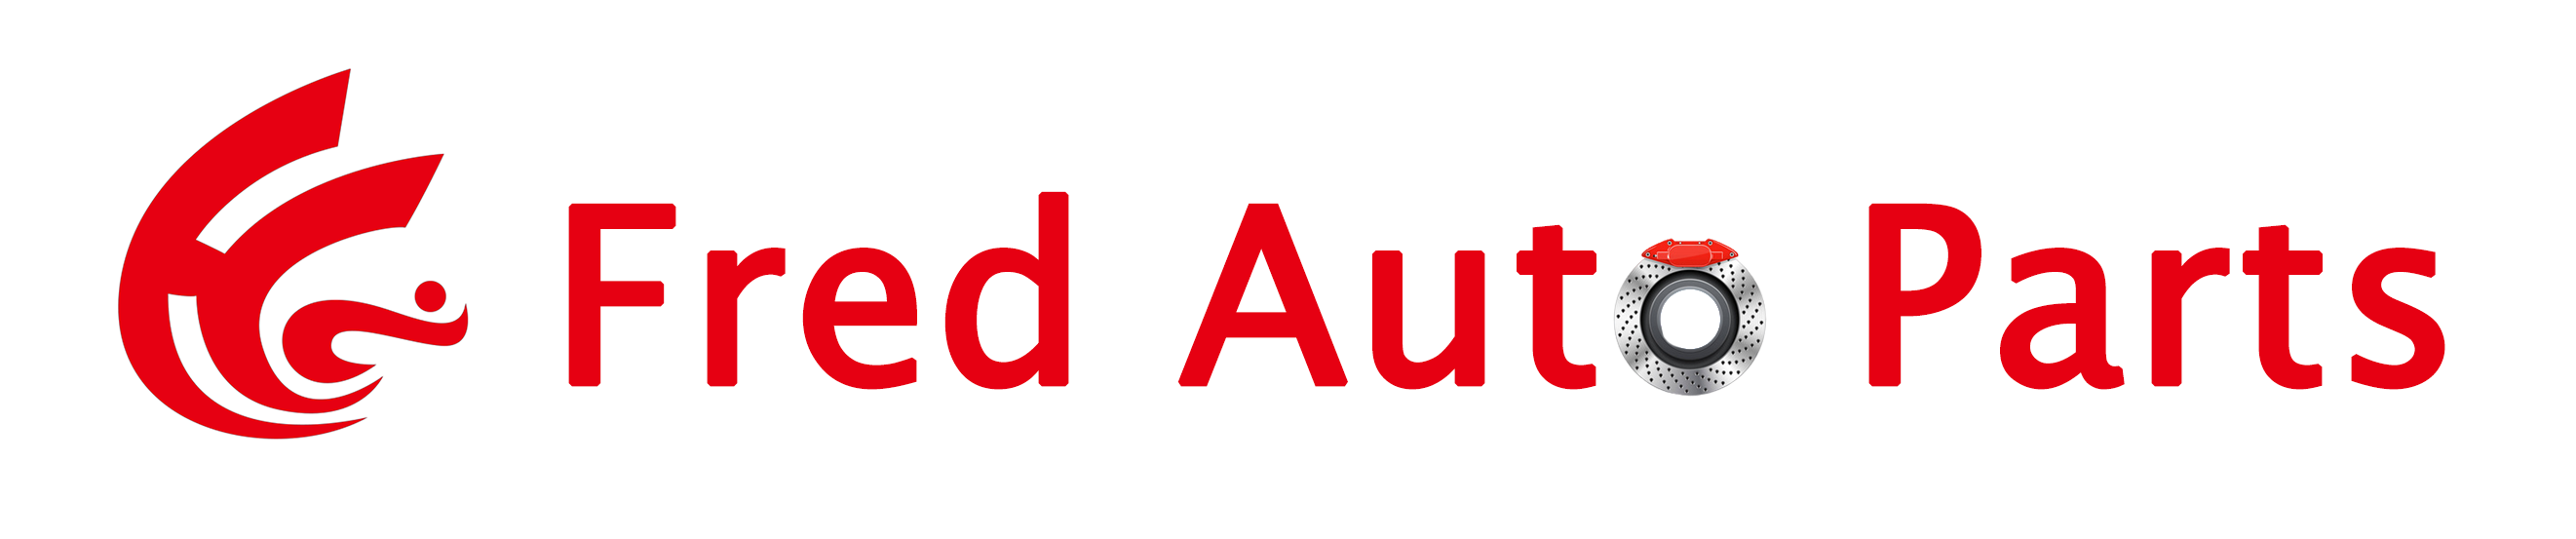 Fred Auto Parts Footer Logo